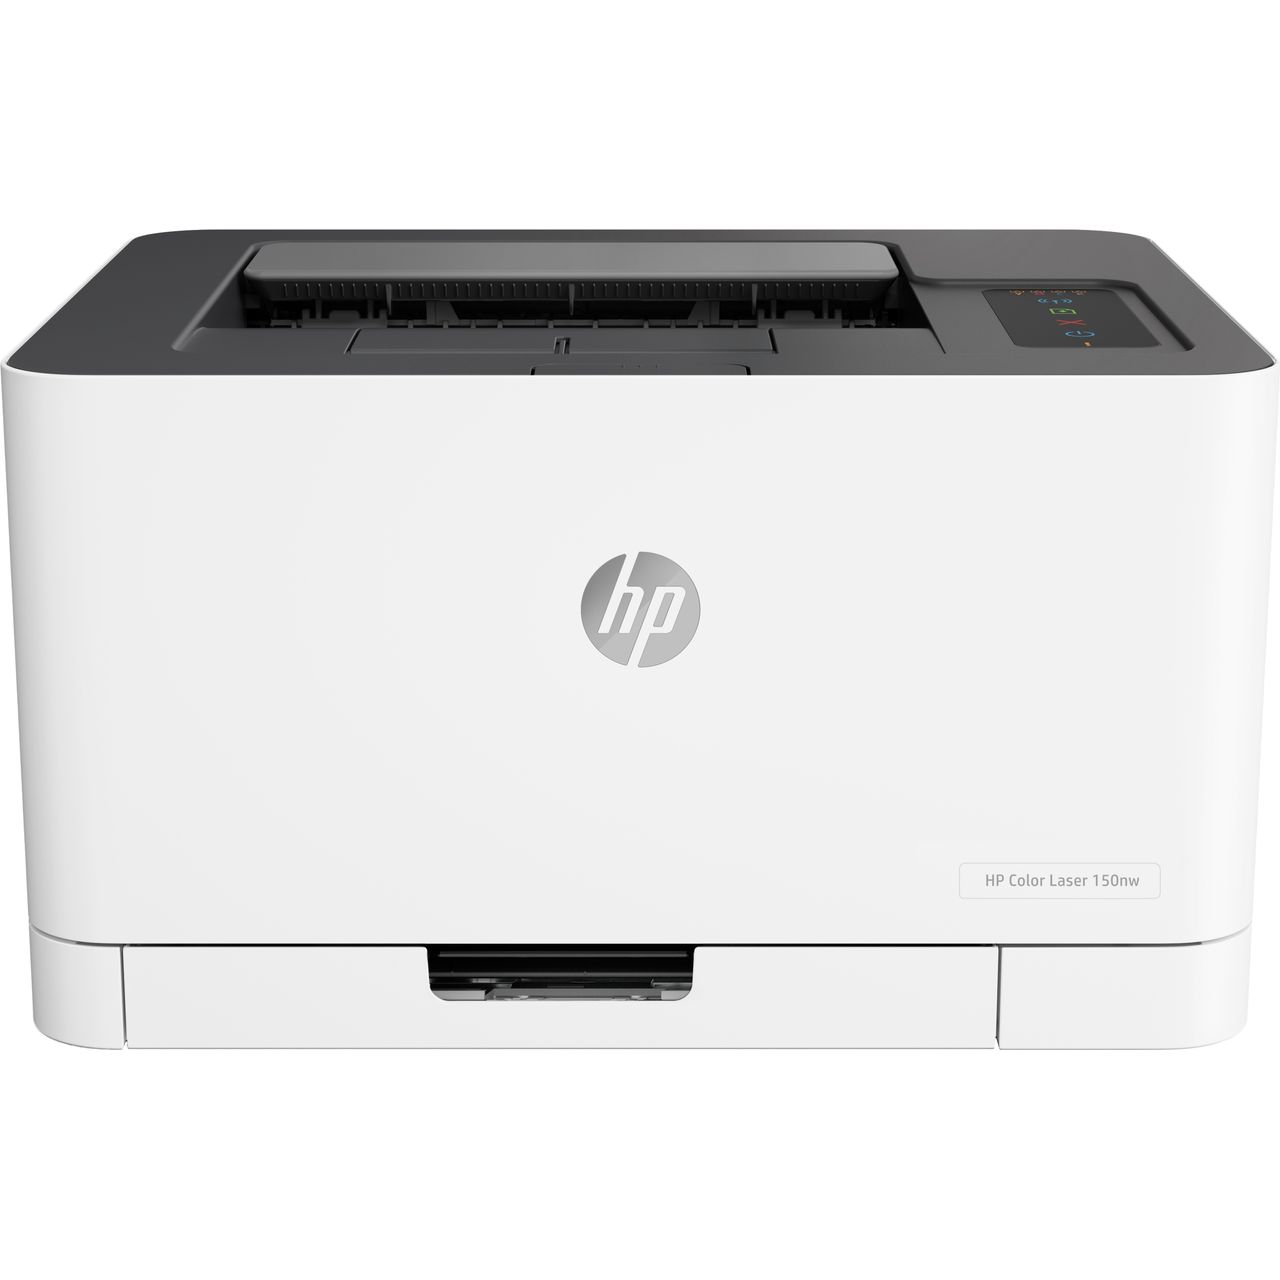 HP 150nw Laser Printer Review